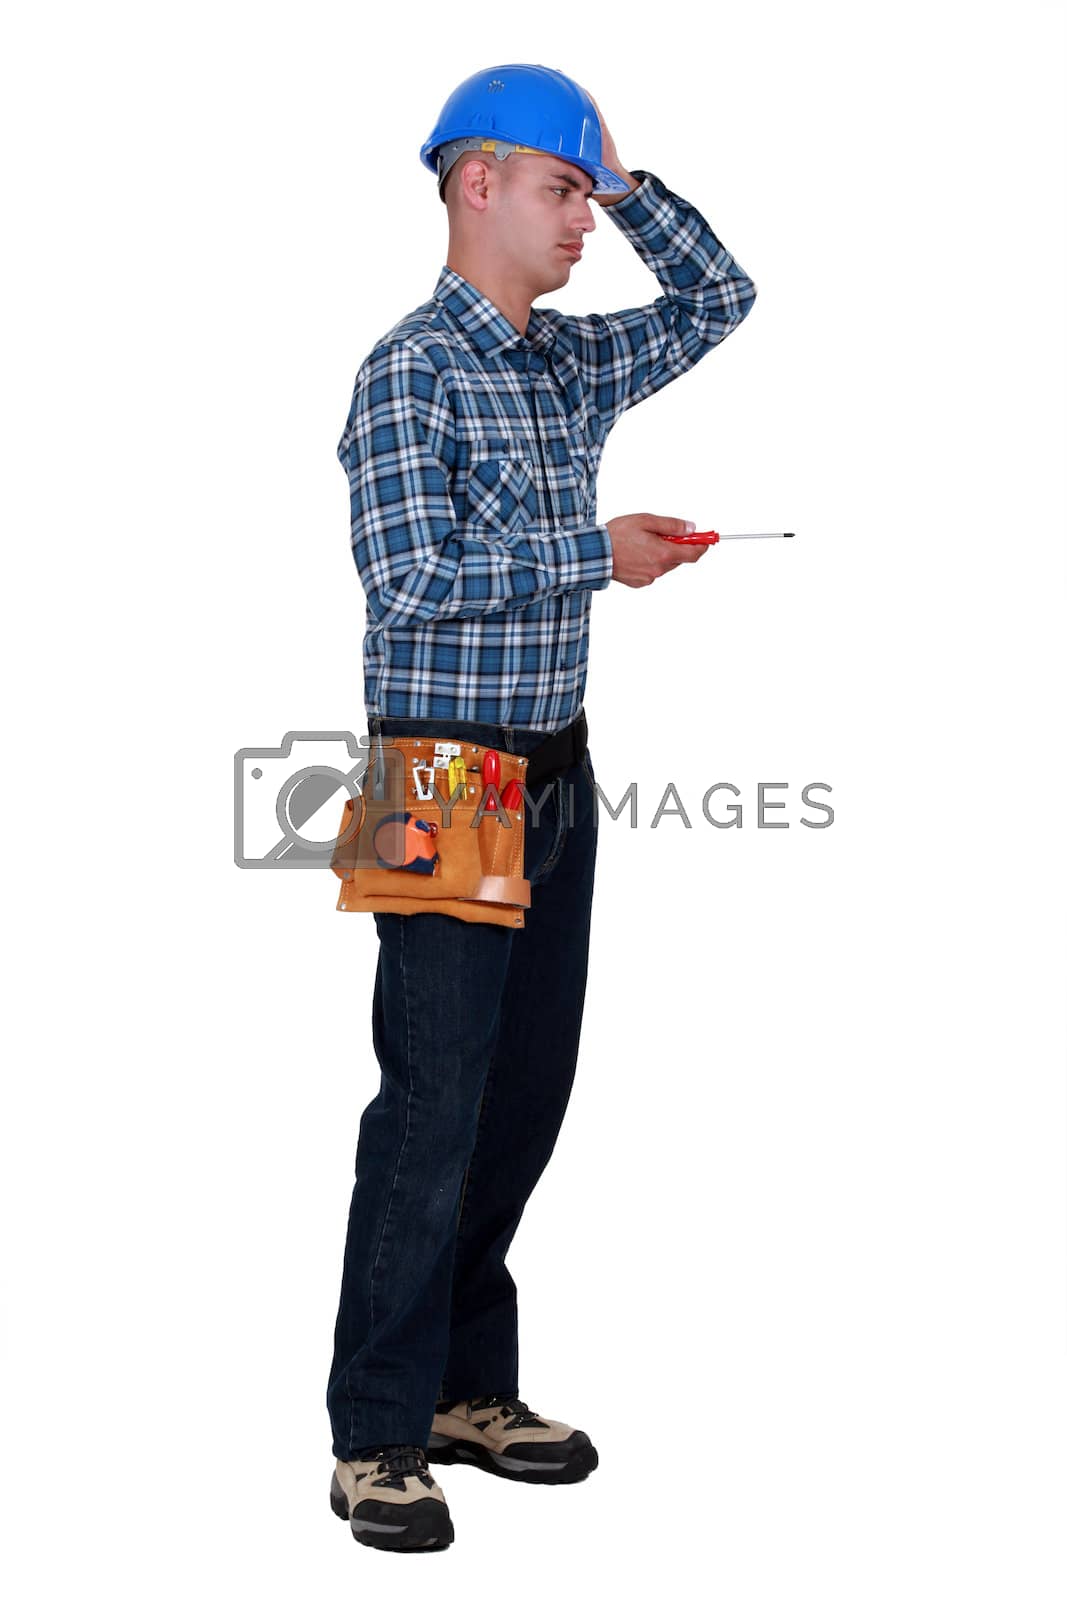 Royalty free image of Annoyed tradesman performing a tedious task by phovoir